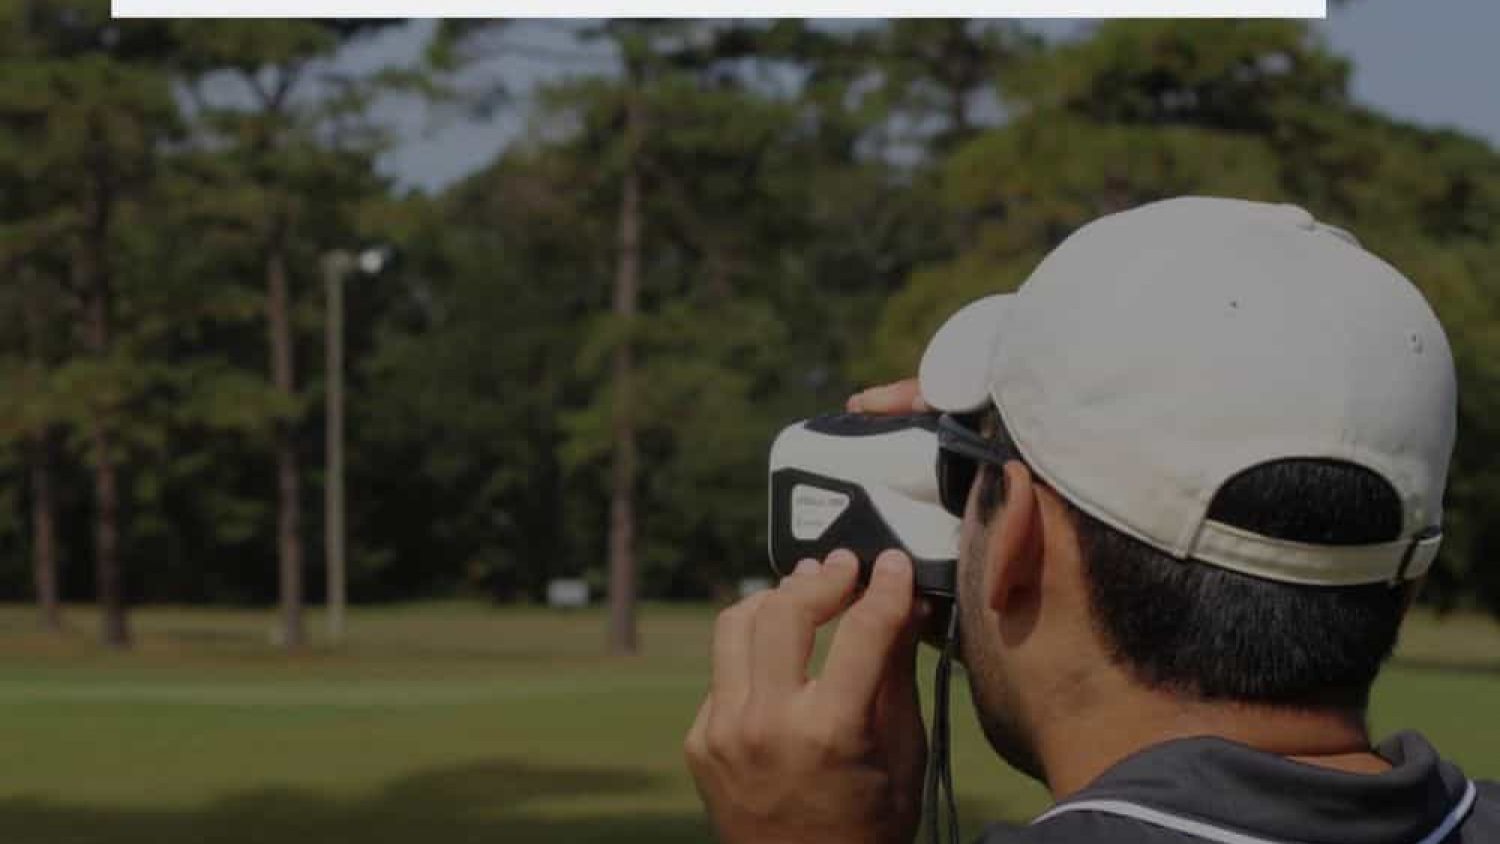 The Best Budget Golf Rangefinders To Up Your Game!